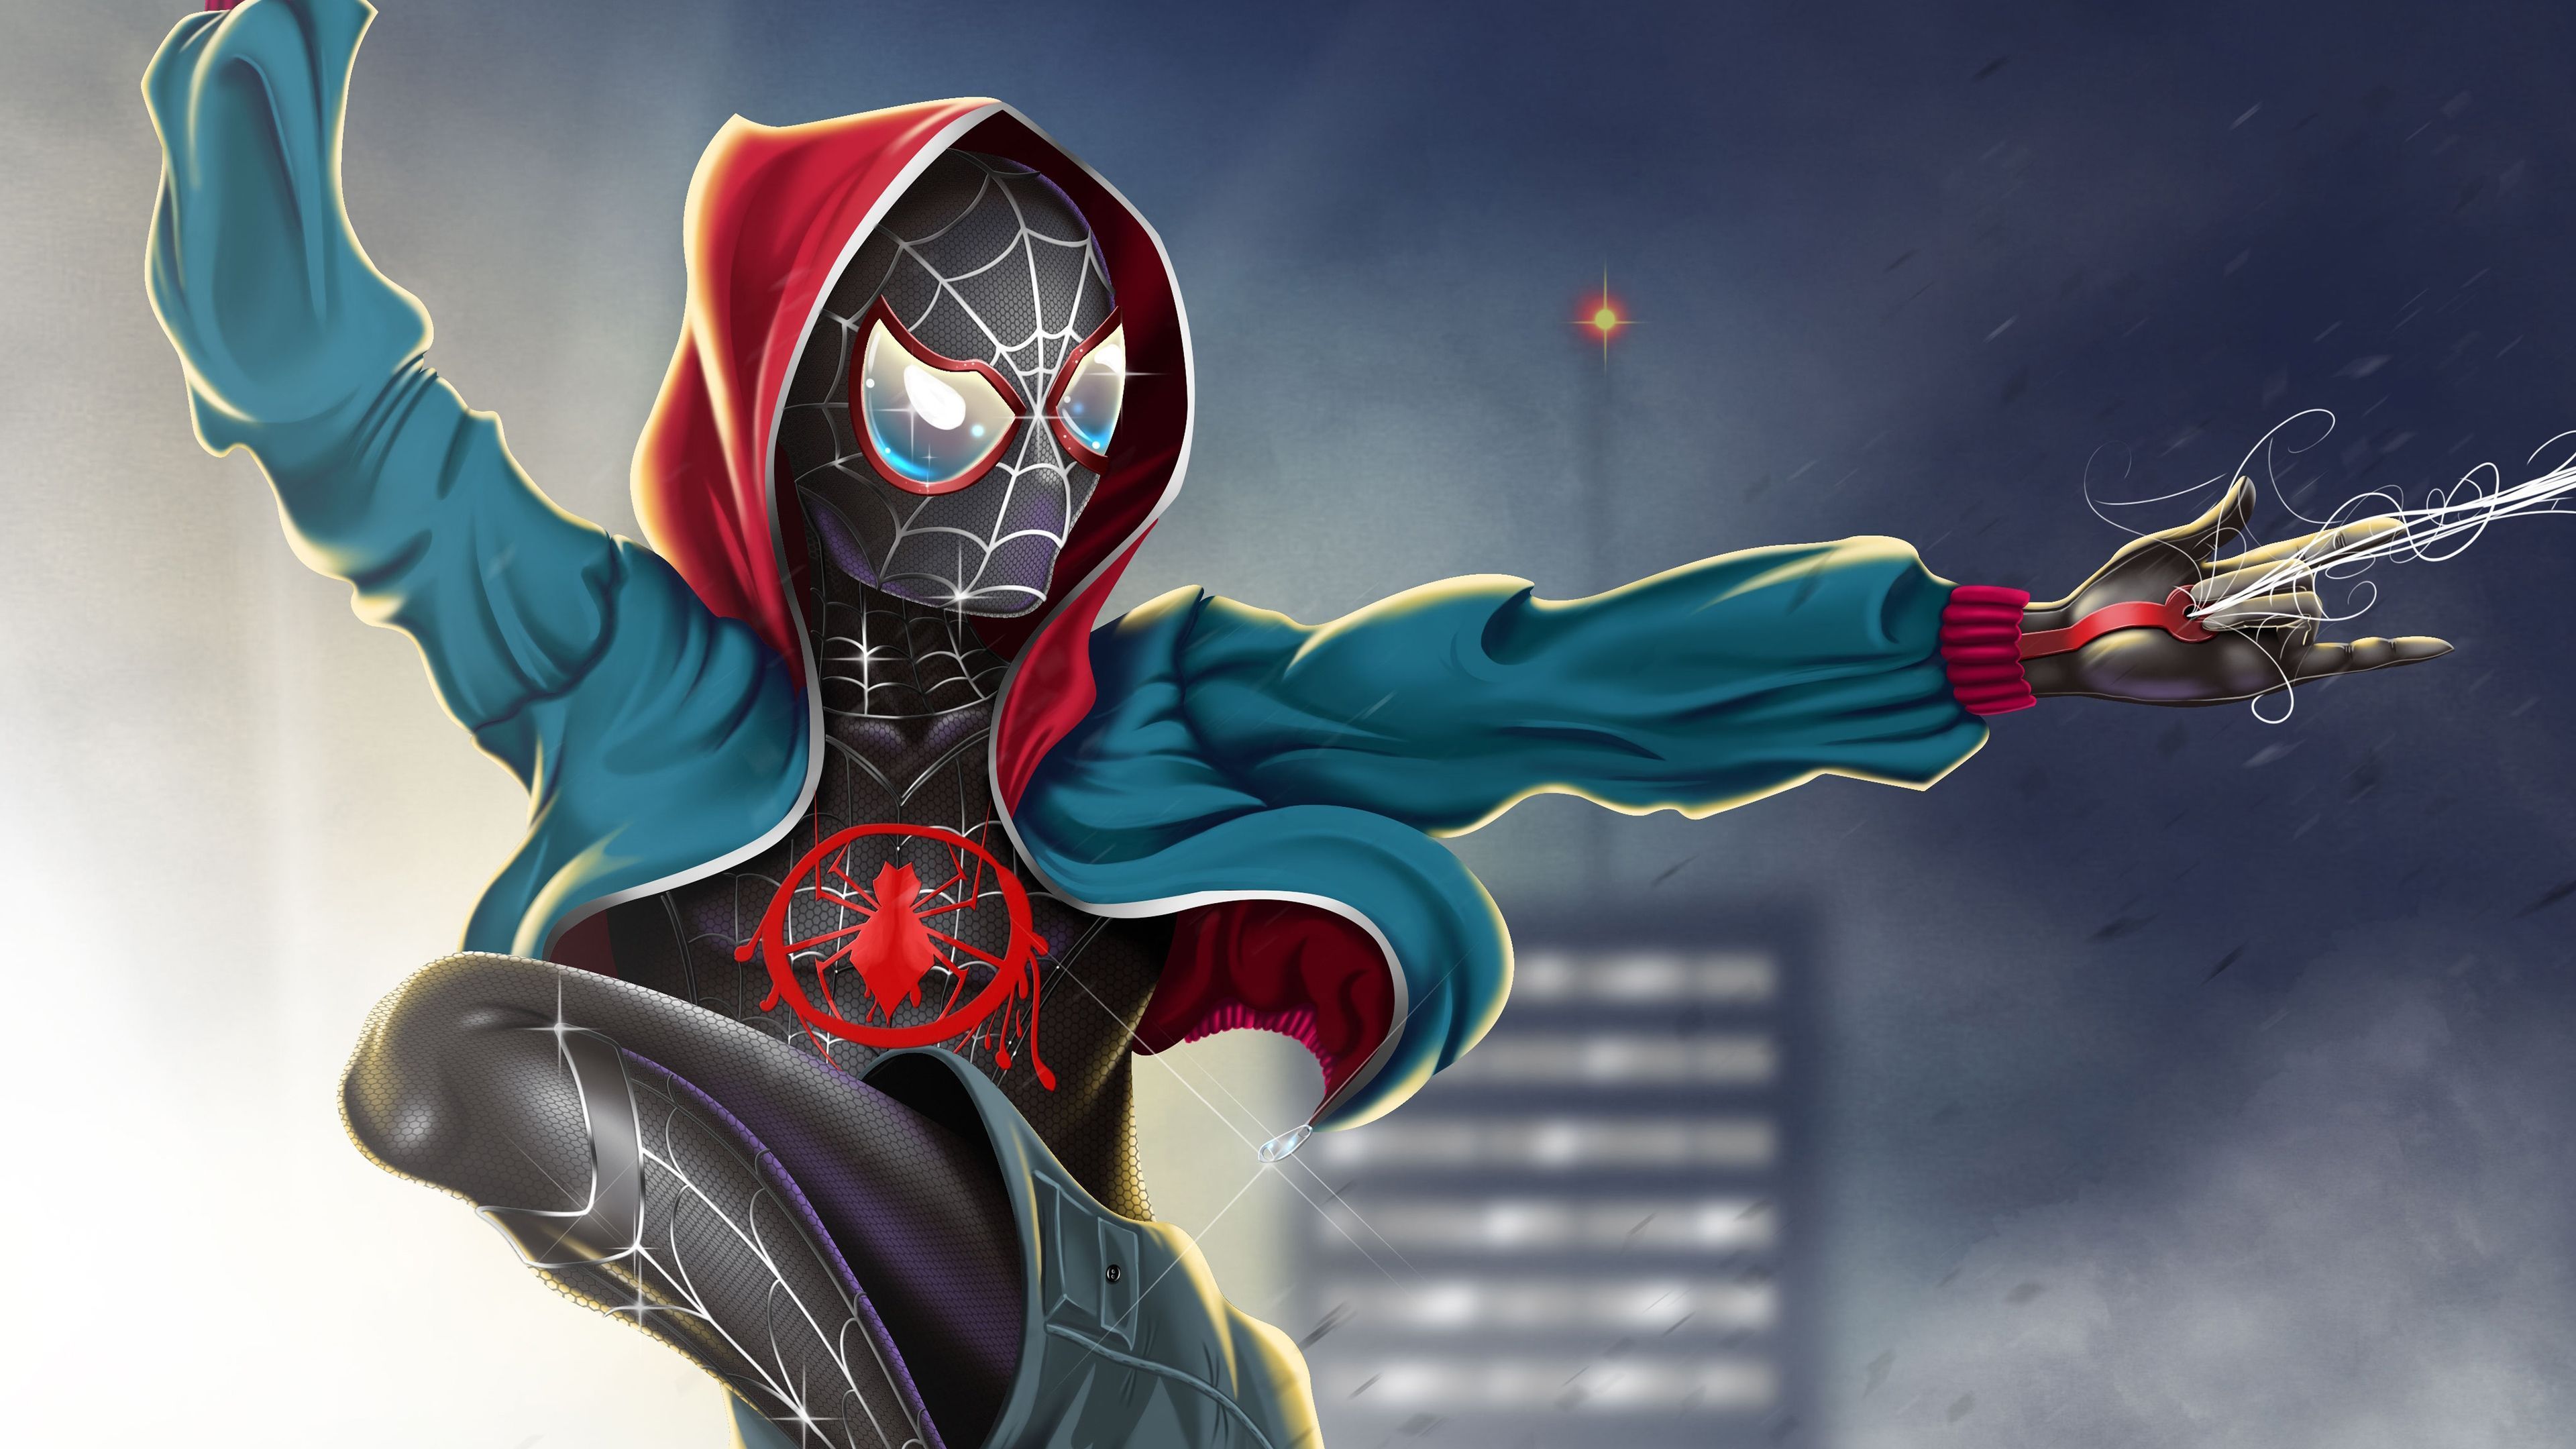 Elegant Spider Man Miles Morales Suit - Spiderman Into The Spider Verse , HD Wallpaper & Backgrounds